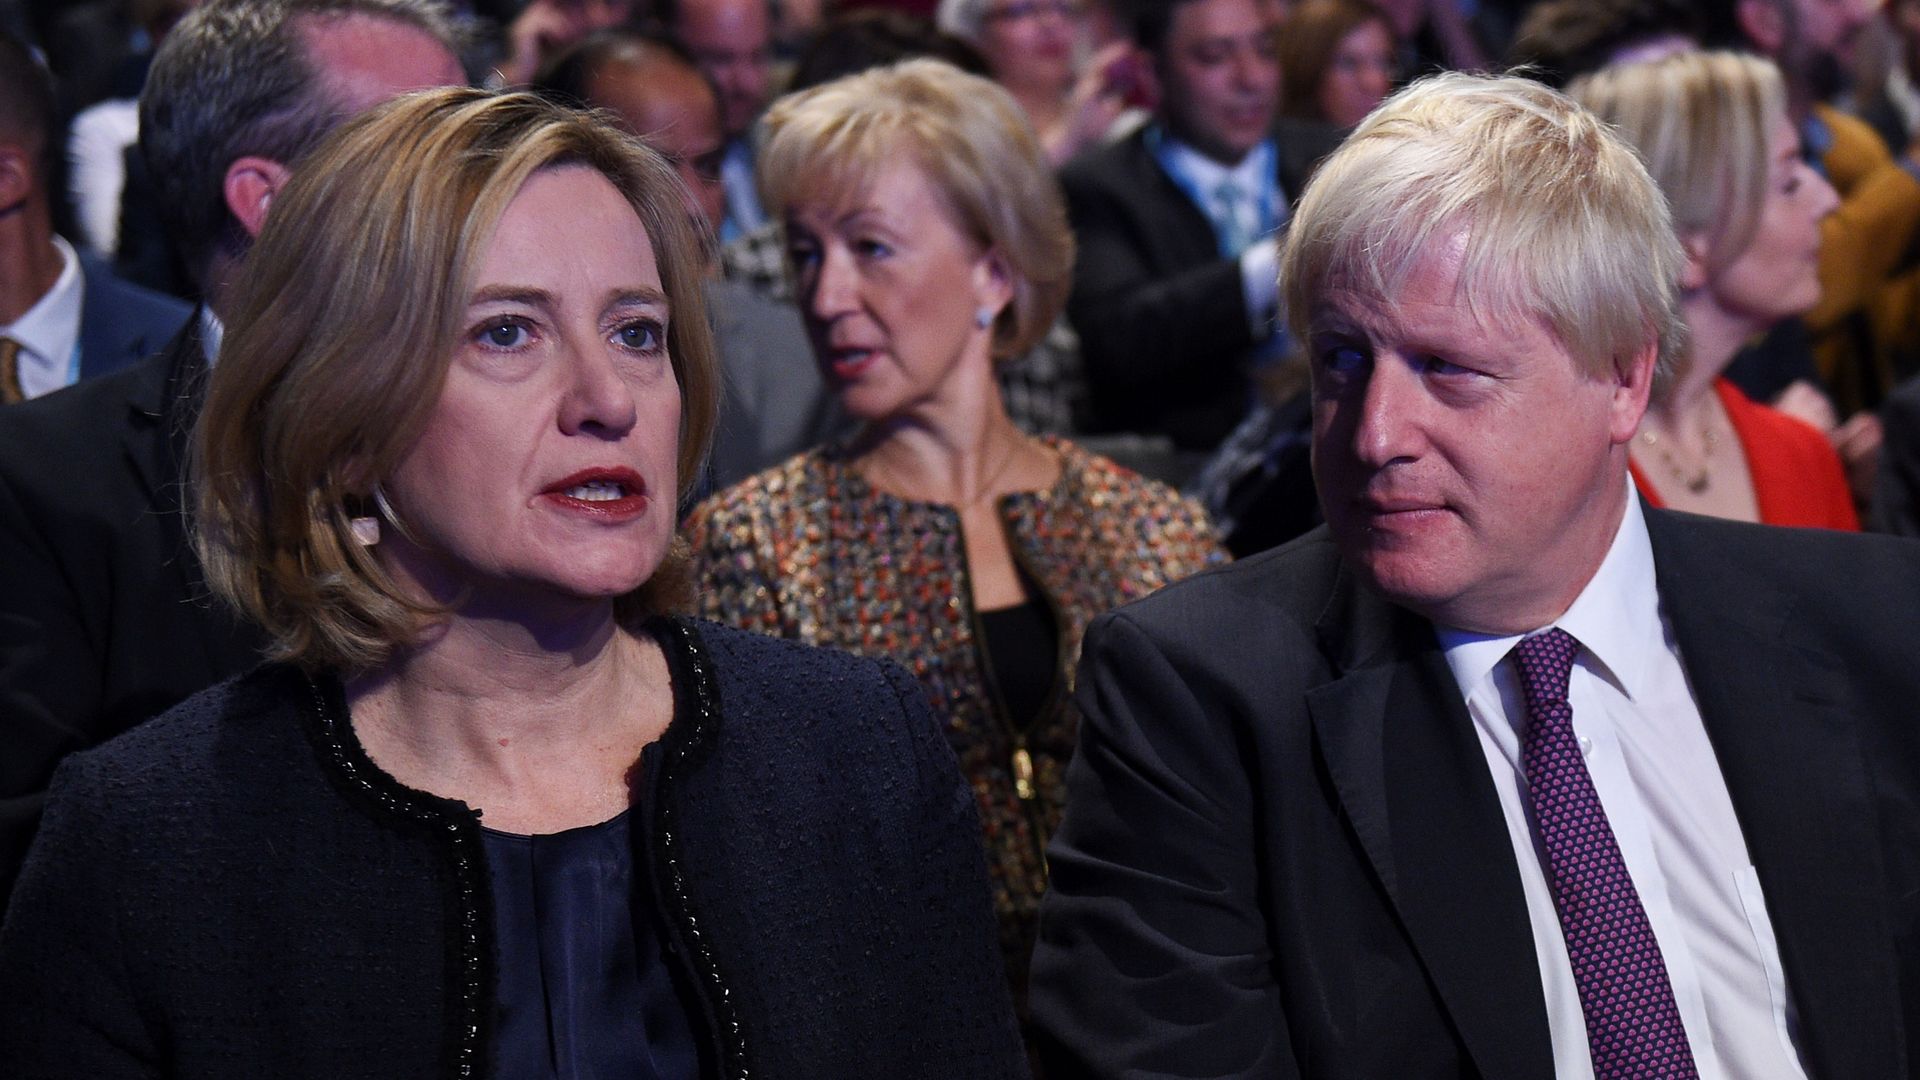 Amber Rudd and Boris Johnson at the Conservative Party annual conference at the Manchester Central Convention Centre in Manchester, northwest England, on October 4, 2017